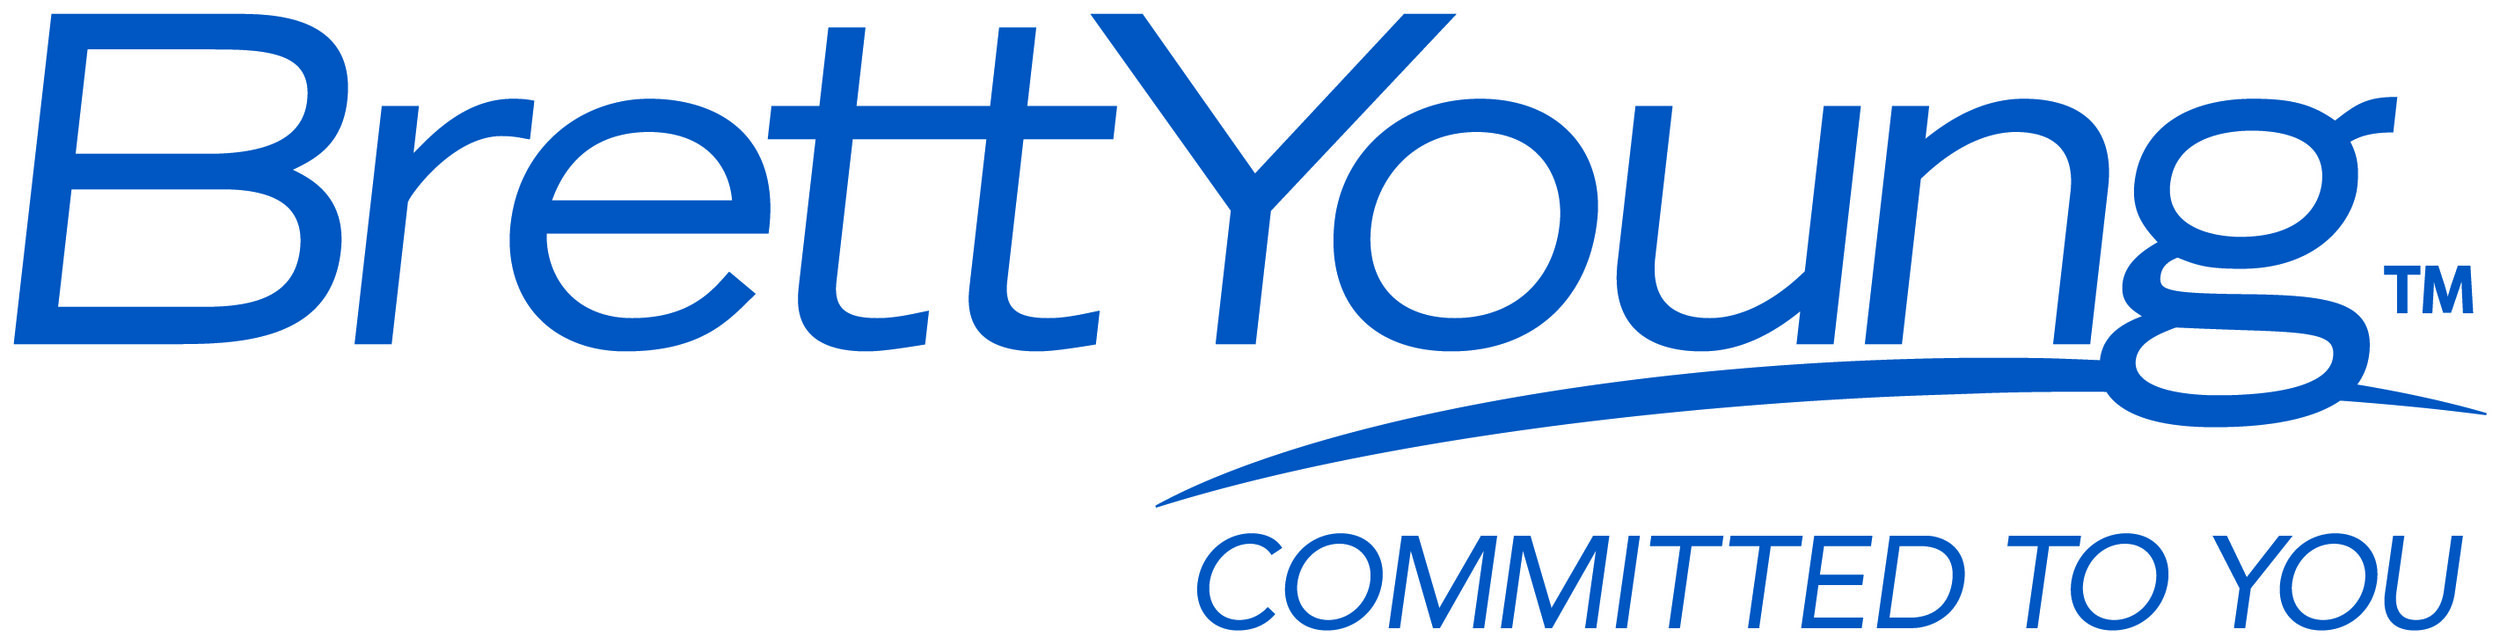 BrettYoung_logo_Committed_tagline_2017_4C.jpg